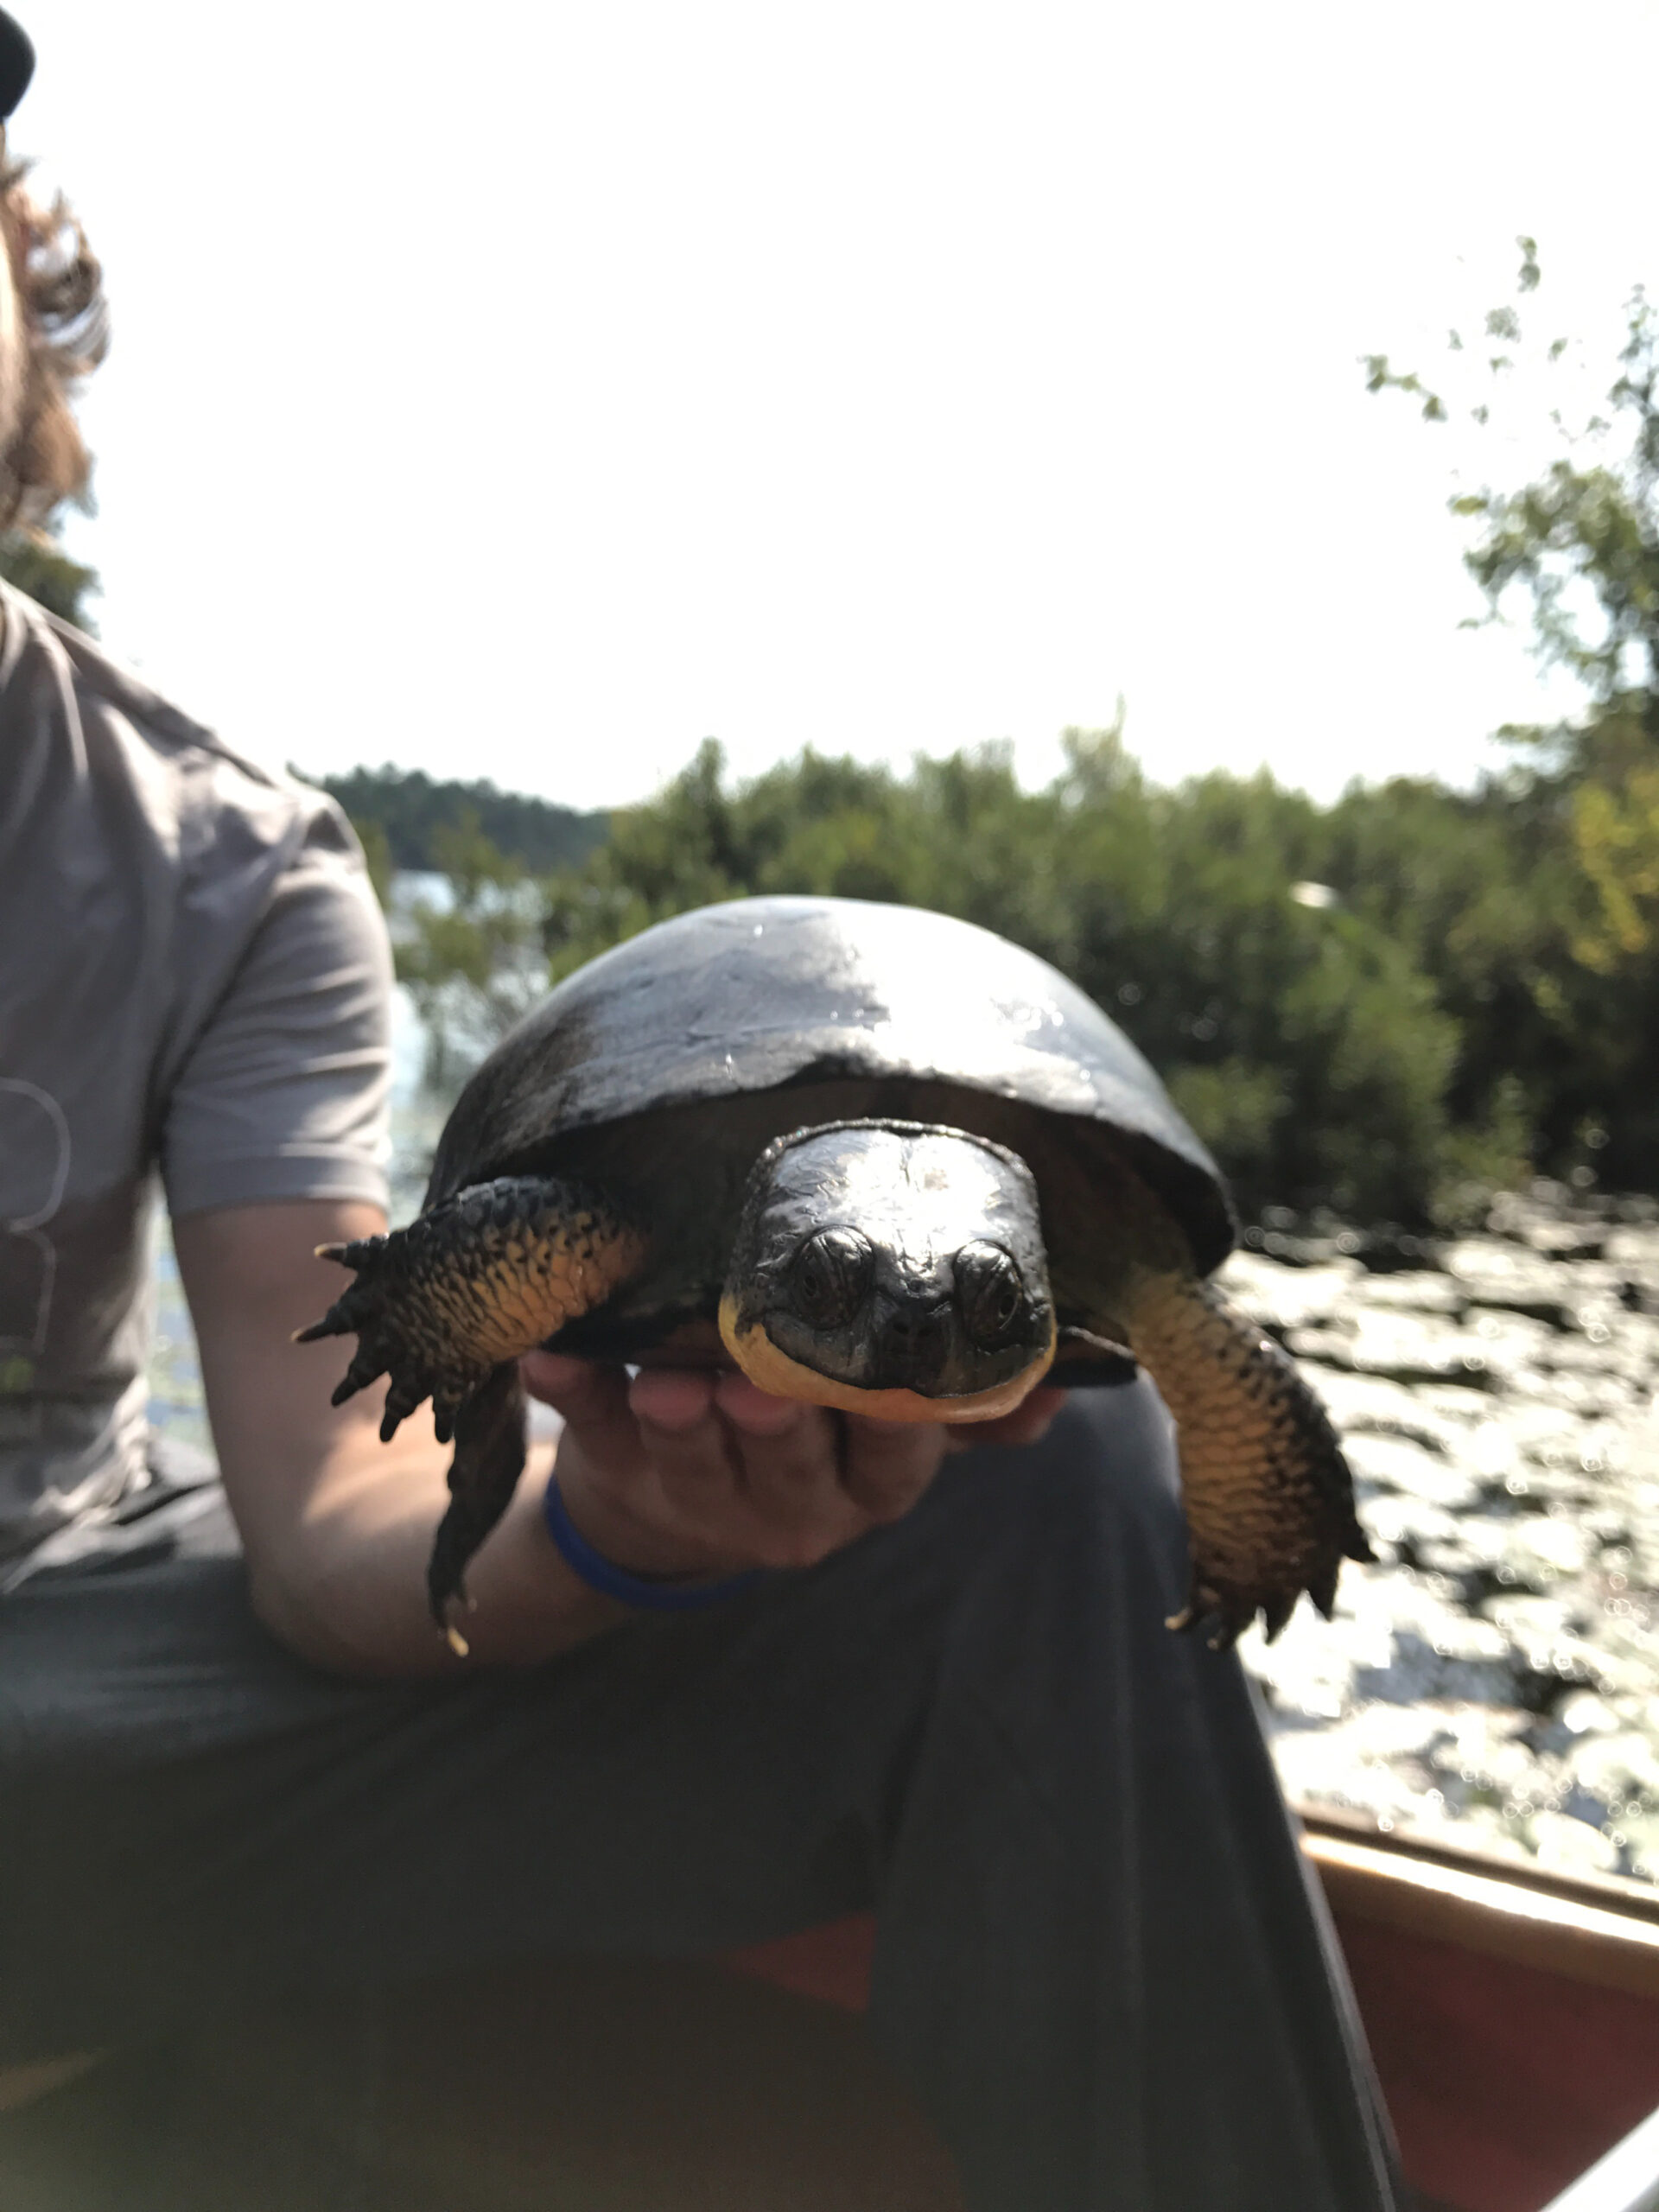 A Blanding's turtle being held in a hand on canoe